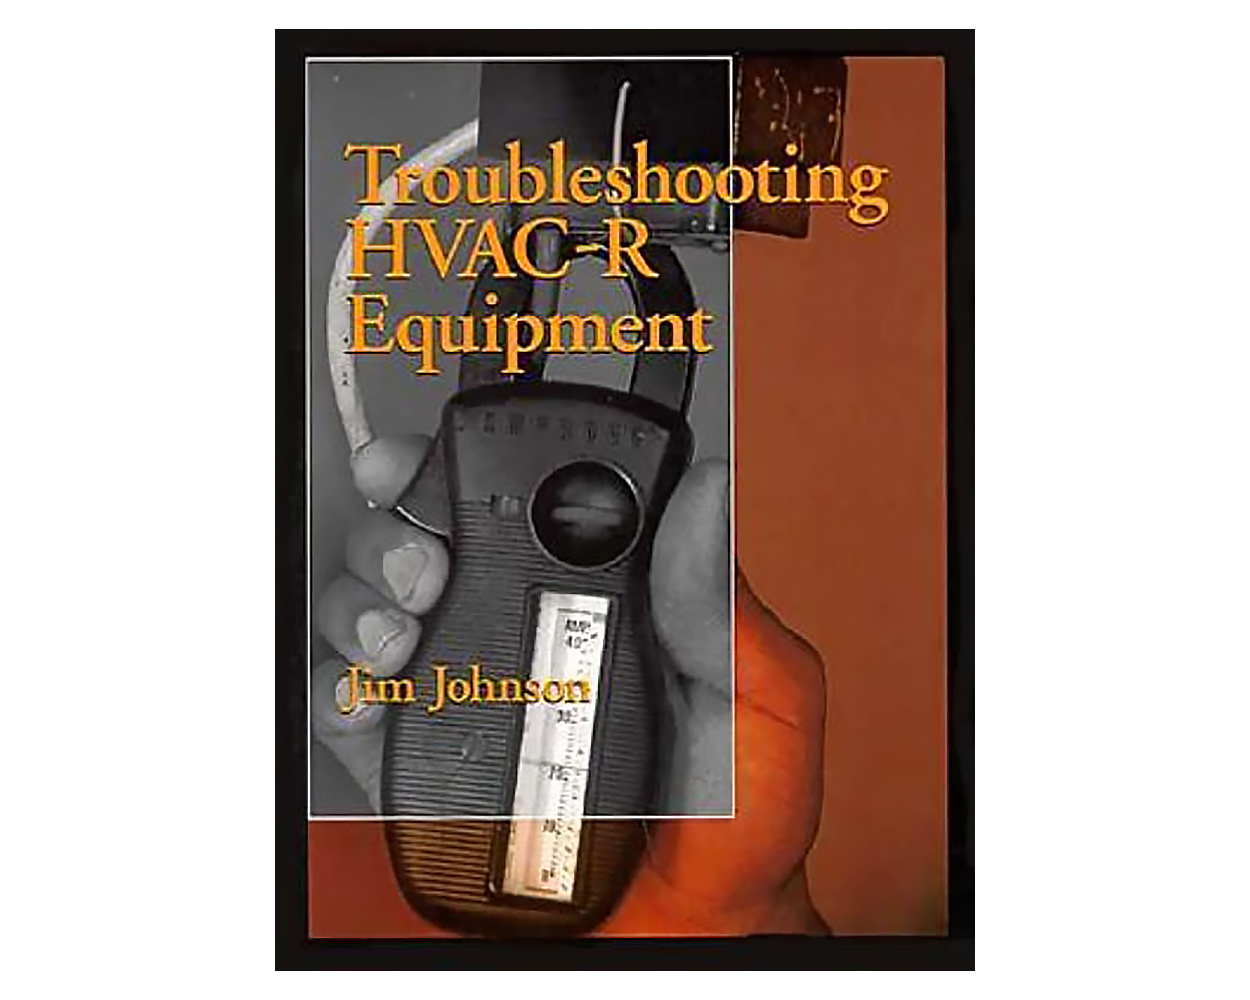 troubleshooting-hvac-r-systems-by-jim-johnson-builder-s-book-inc